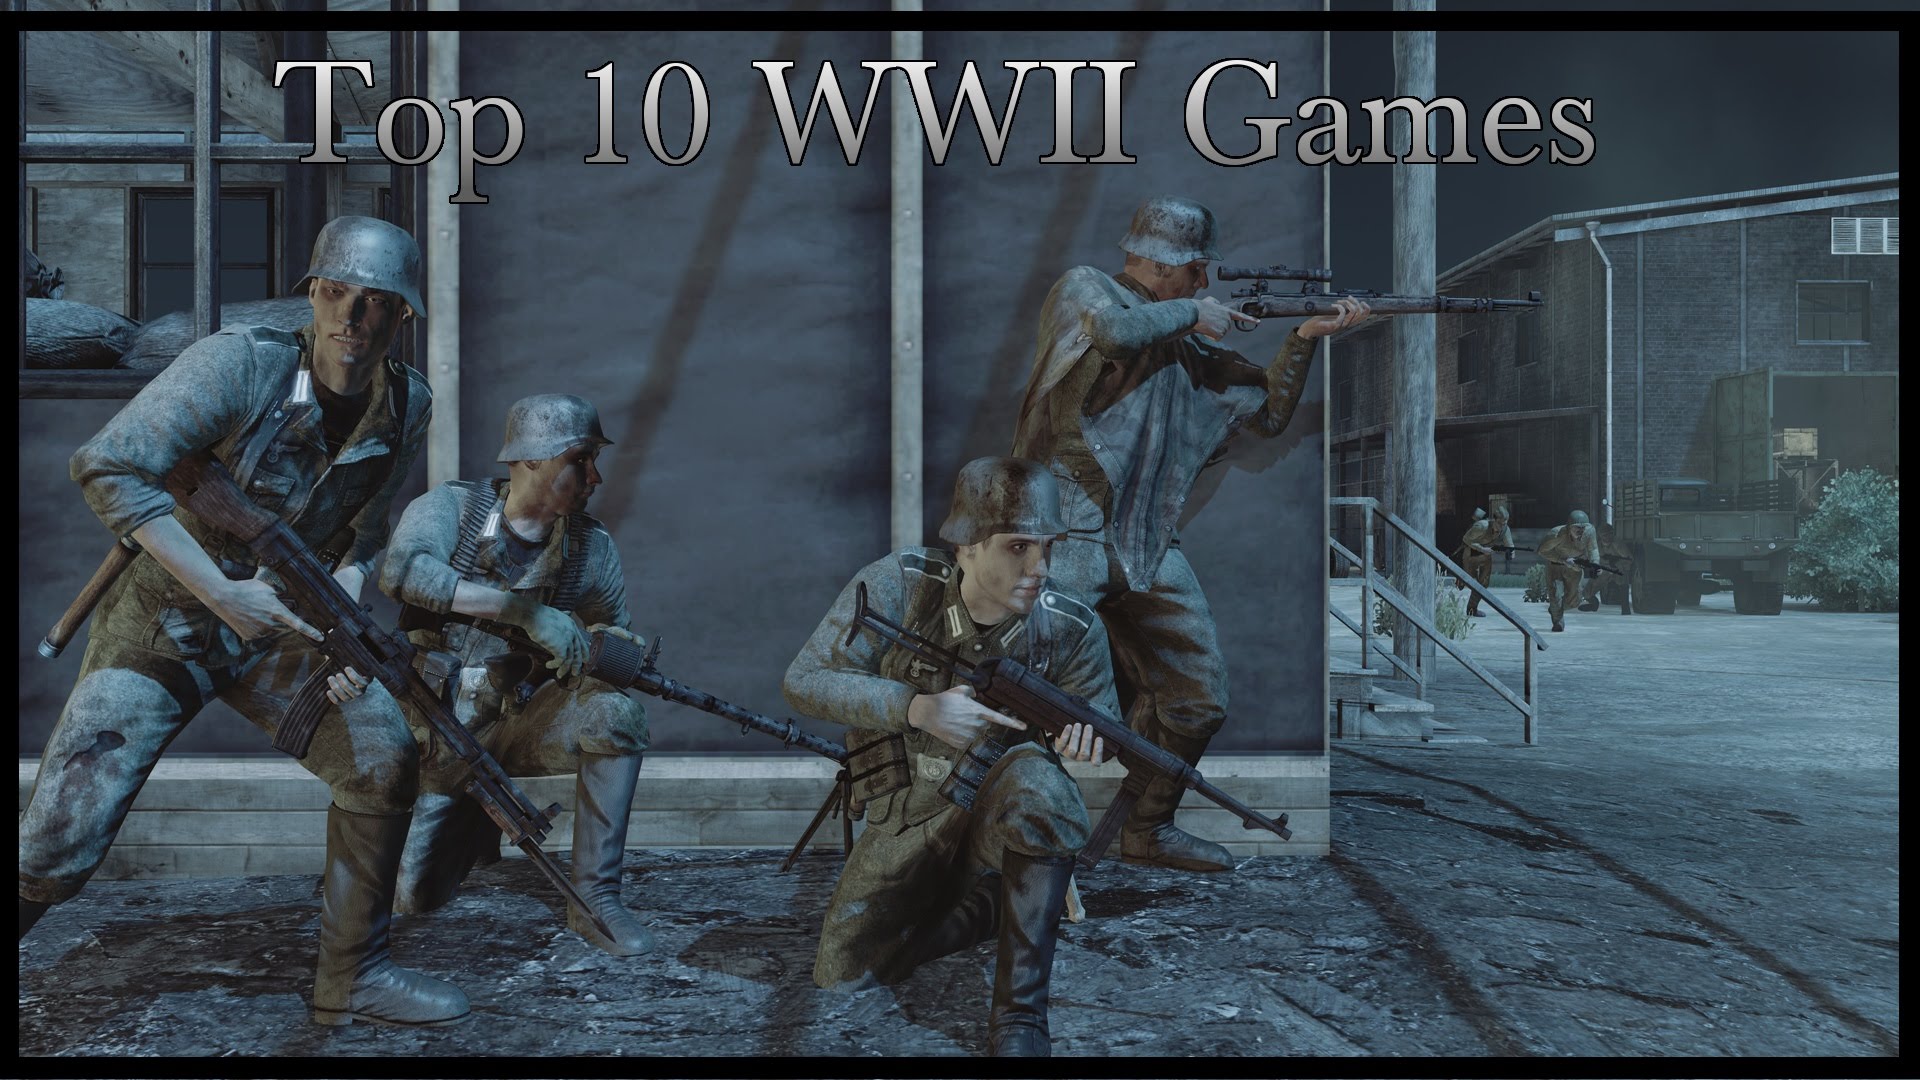 Top 10 World War 2 Video Games Of All Time – Pros & Cons [2016]